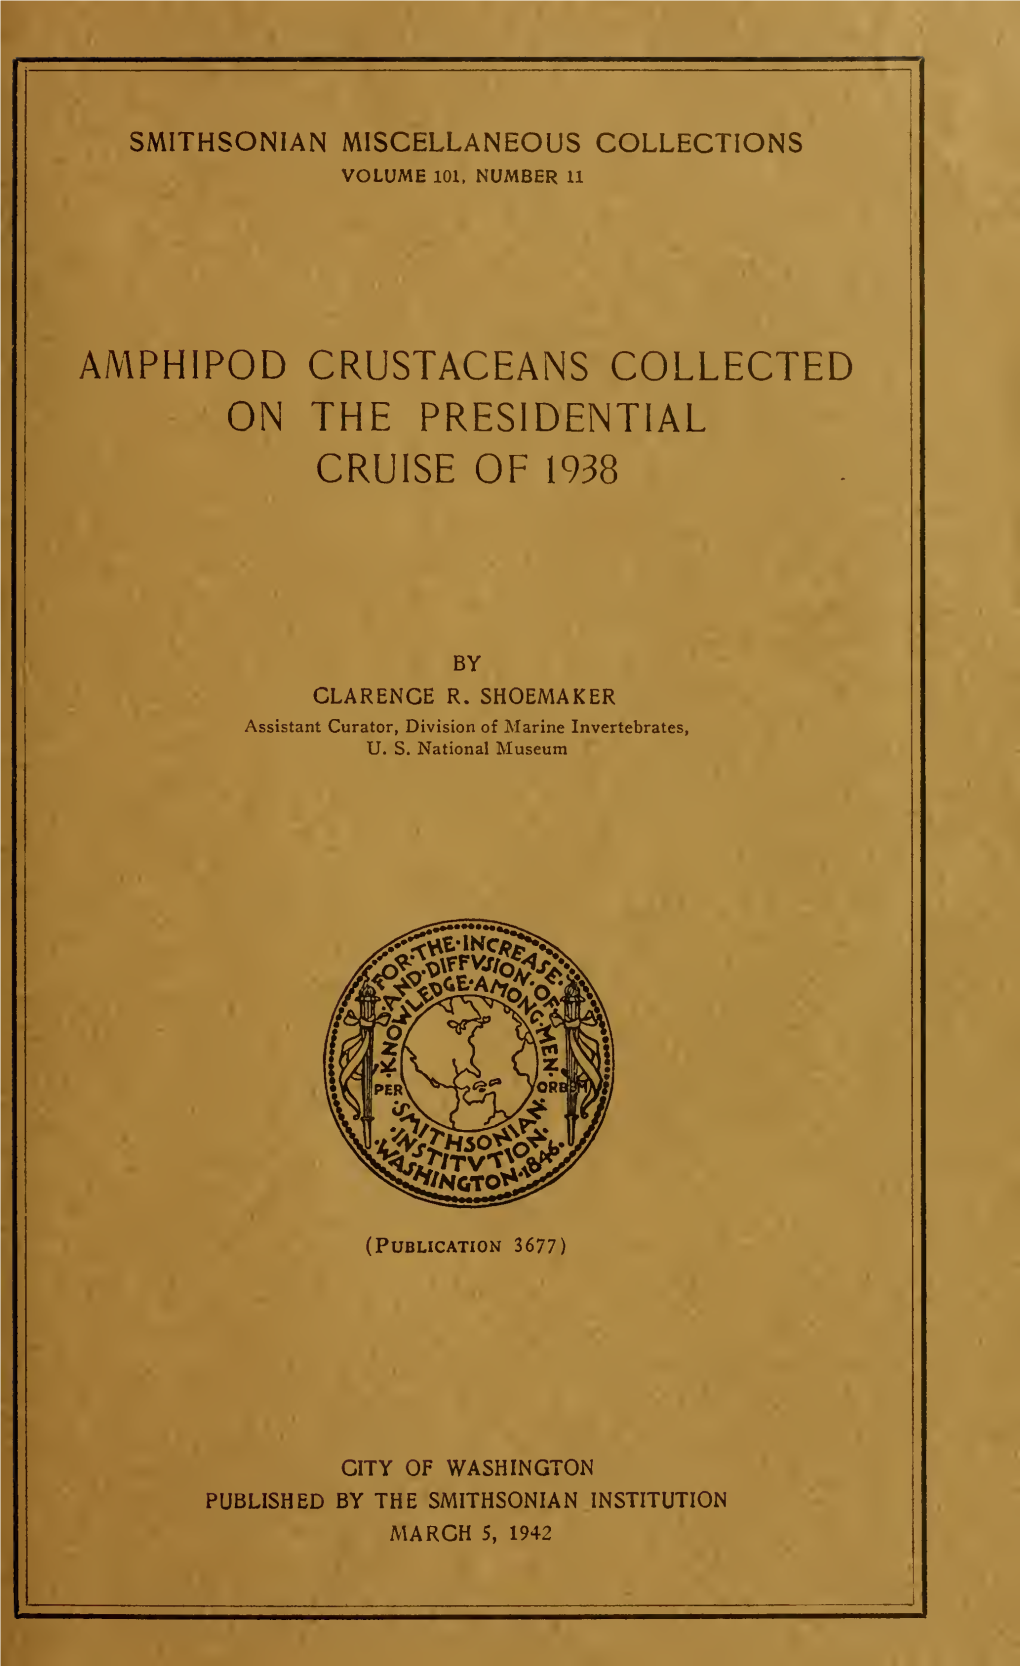 Amphipod Crustaceans Collected on the Presidential Cruise of 1938